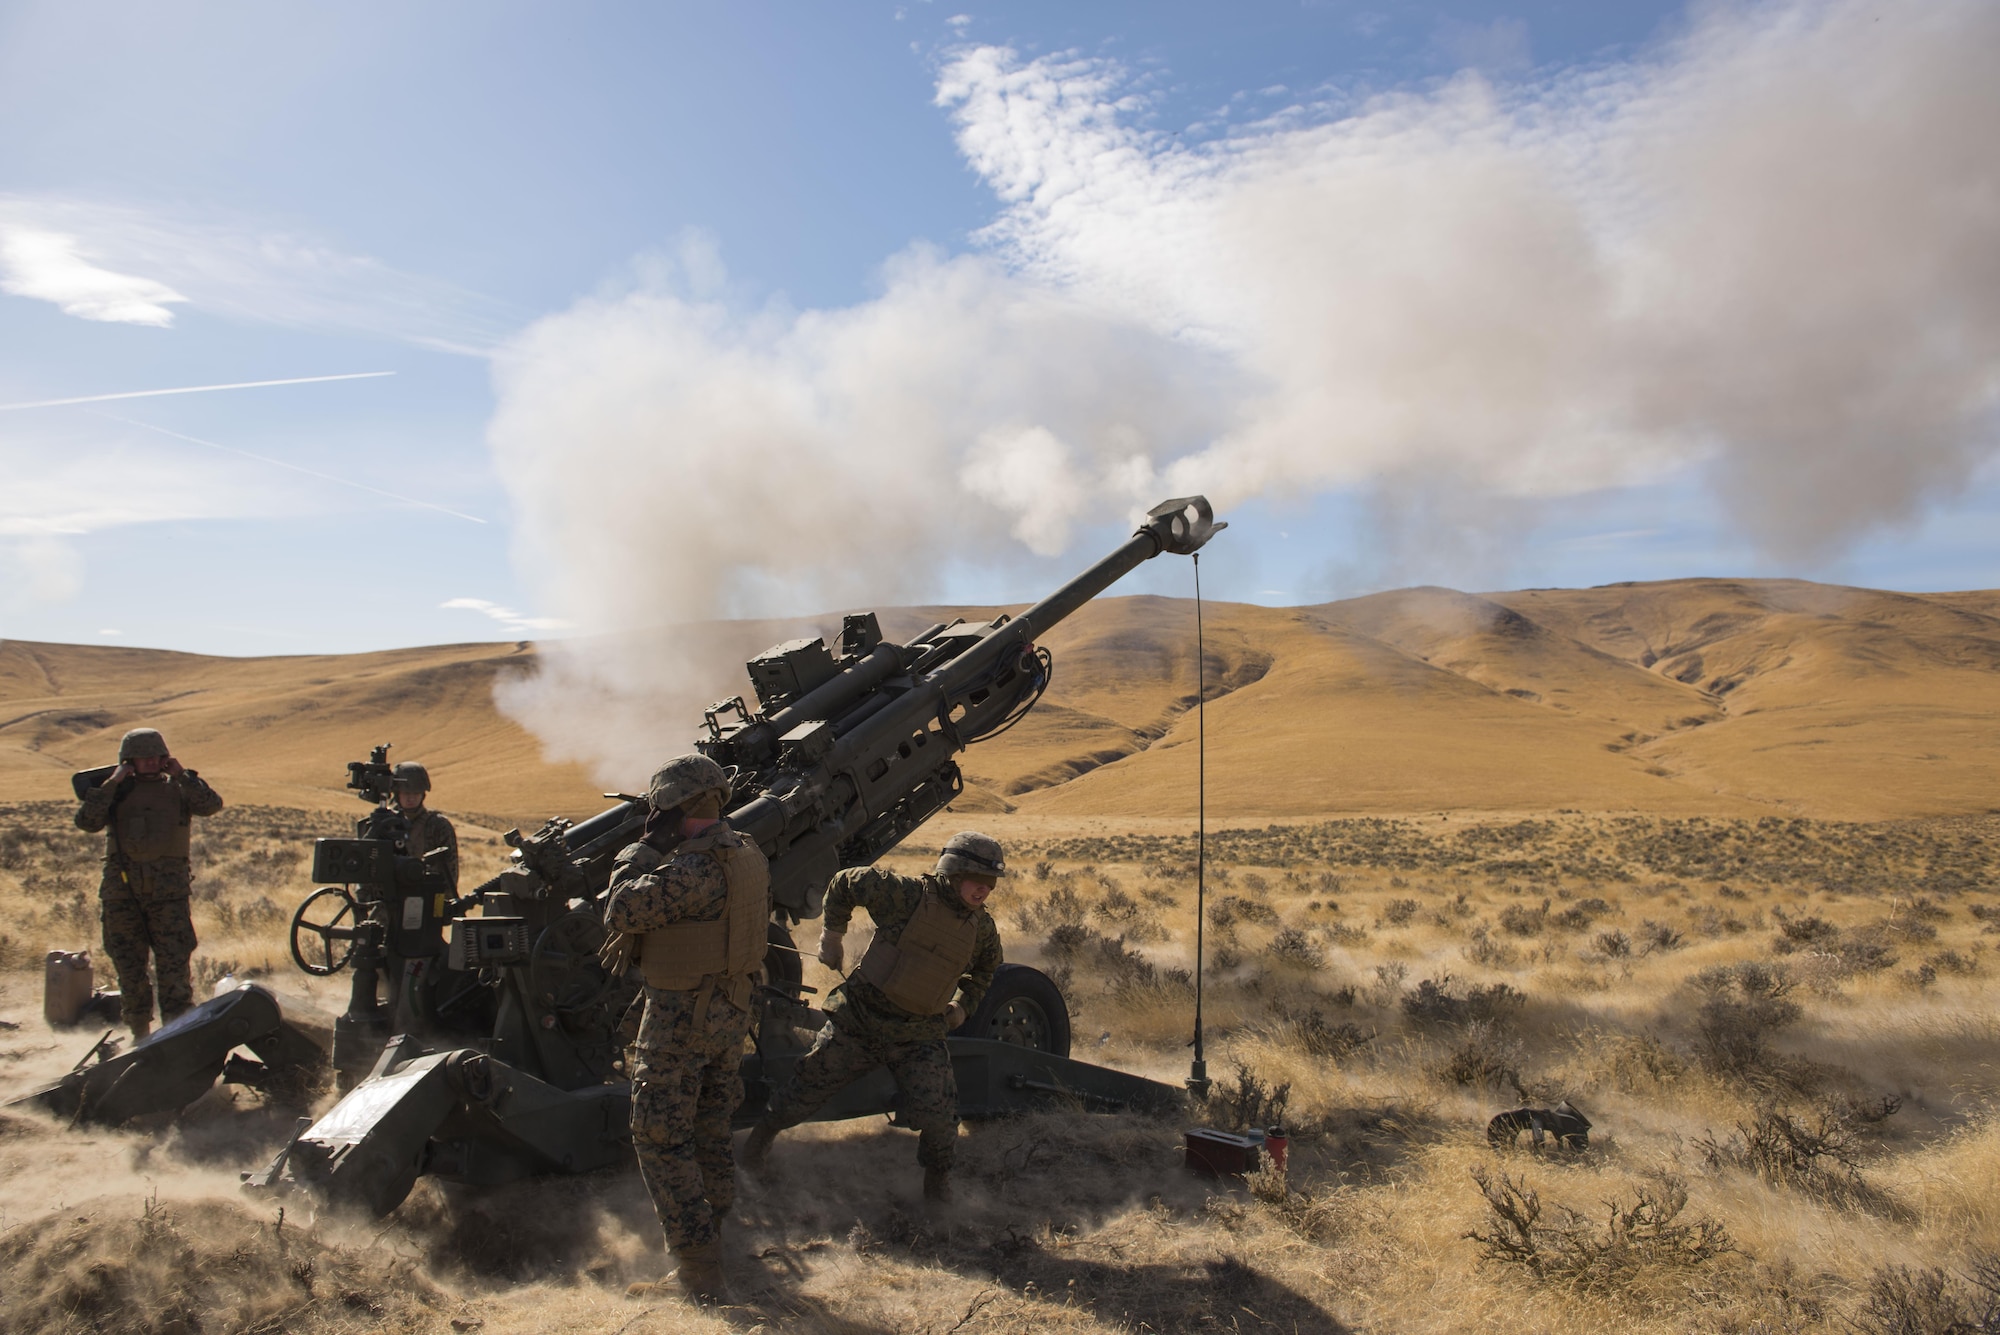 Marines of P Battery 5/14 fire a high explosive projectile downrange from a M777A2 howitzer weapon system during a live-fire training exercise at the Yakima Training Center, Washington, Oct 14, 2017. USMC artillery units mission is to provide long range fire support to infantry ground forces down-range in a deployed environment. (U.S. Air Force photo/Senior Airman Ryan Lackey)